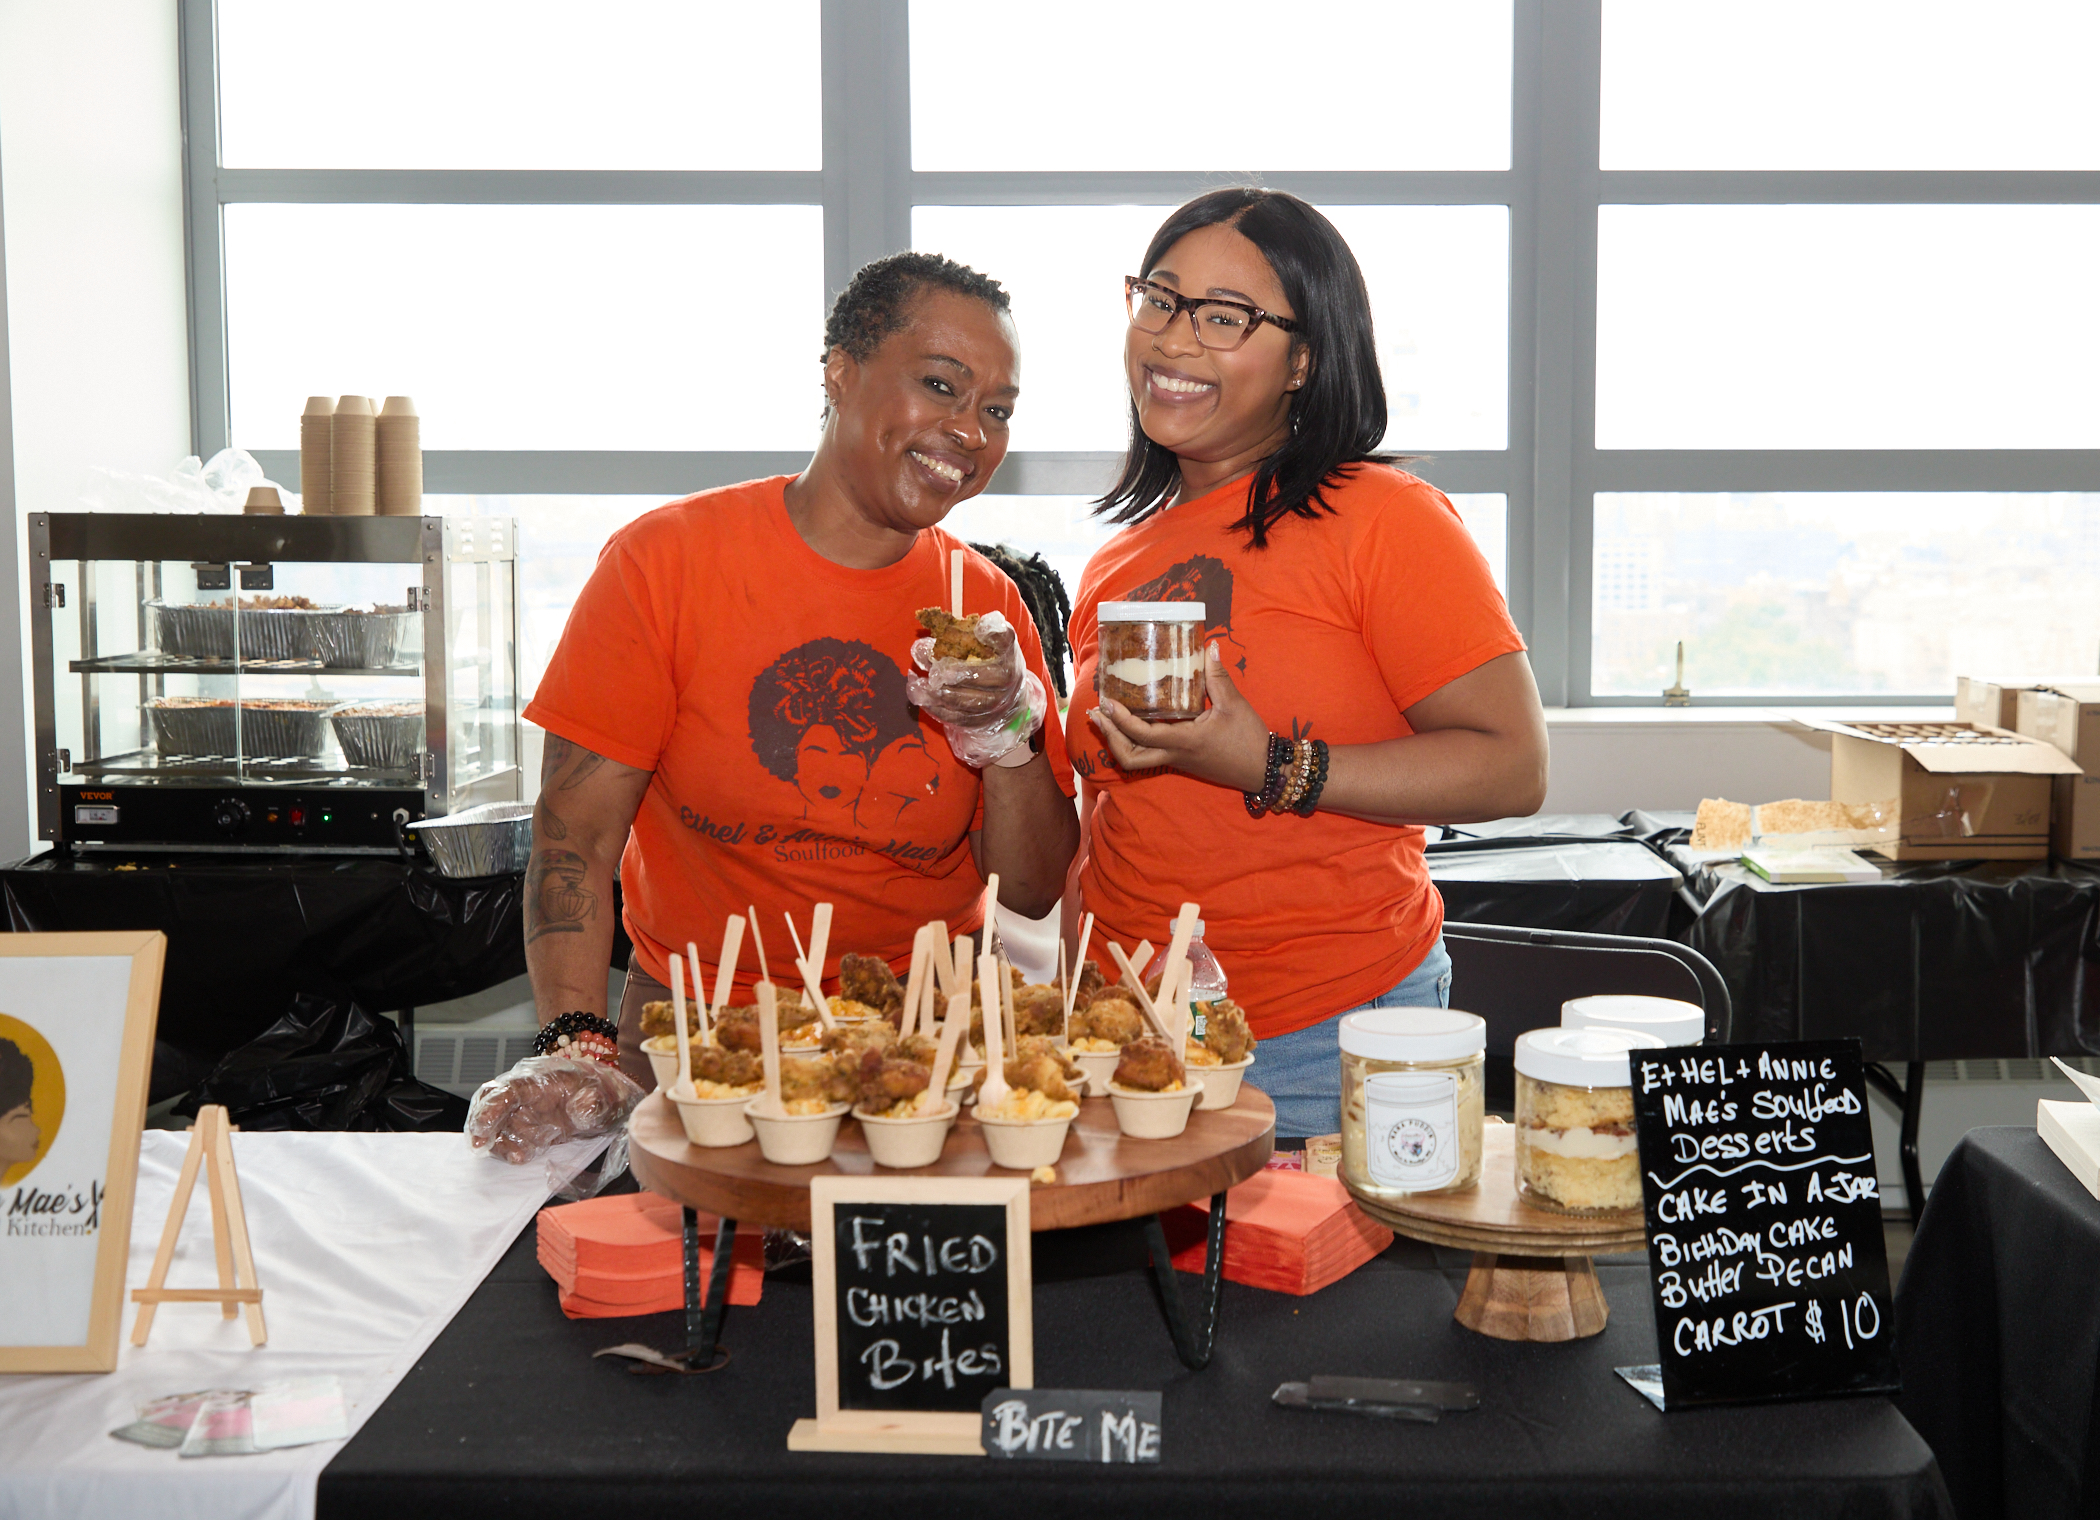 Made in NYC member Ethel and Annie Mae’s Soul Food (Photos by Constance Faulk)